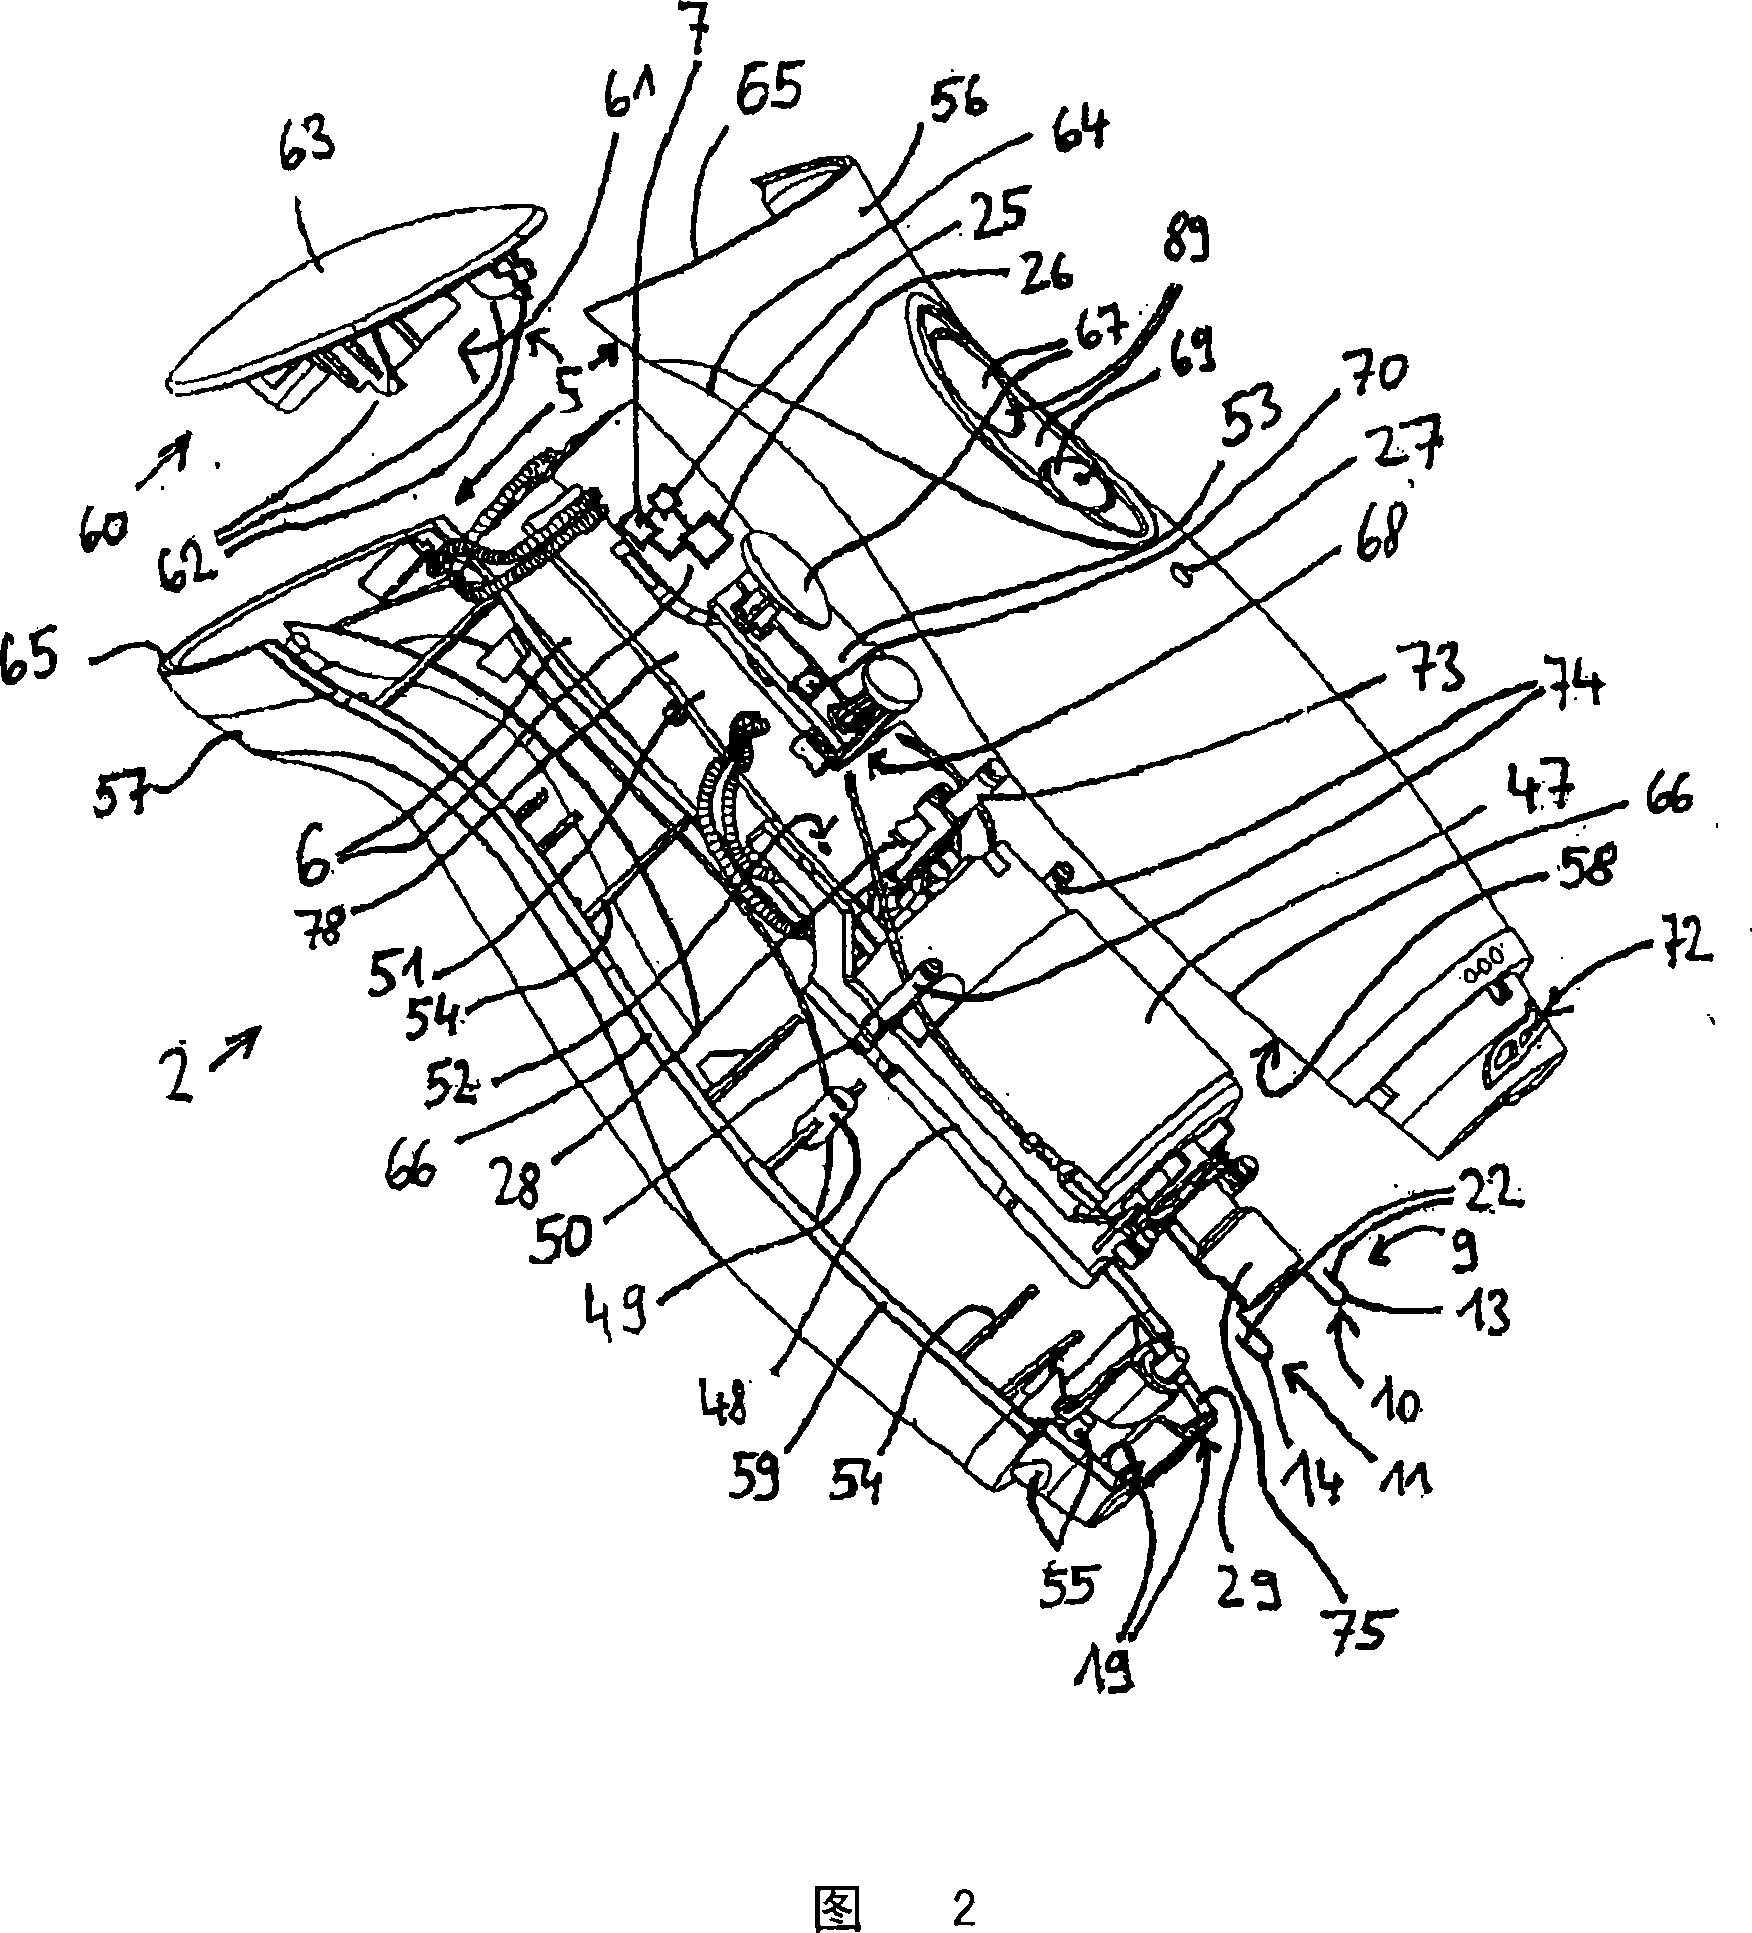 Electric-motor kitchen appliance comprising an electric or electronic control